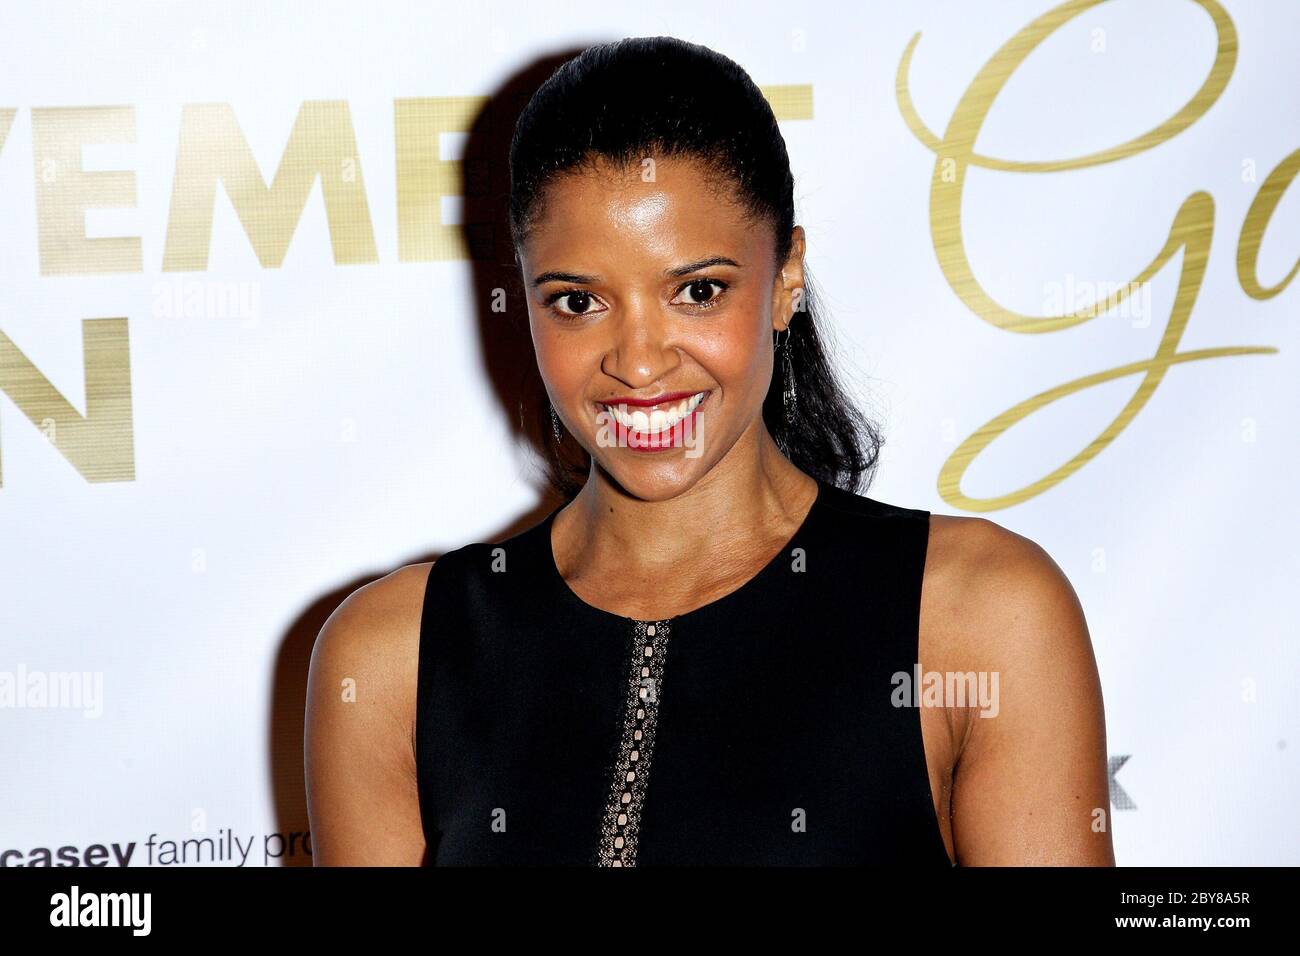 New York, NY, USA. 30 January, 2017. Renee Elise Goldsberry at the National CARES Mentoring Movement Second Annual For the Love of Our Children Gala at Cipriani 42nd Street. Credit: Steve Mack/Alamy Stock Photo